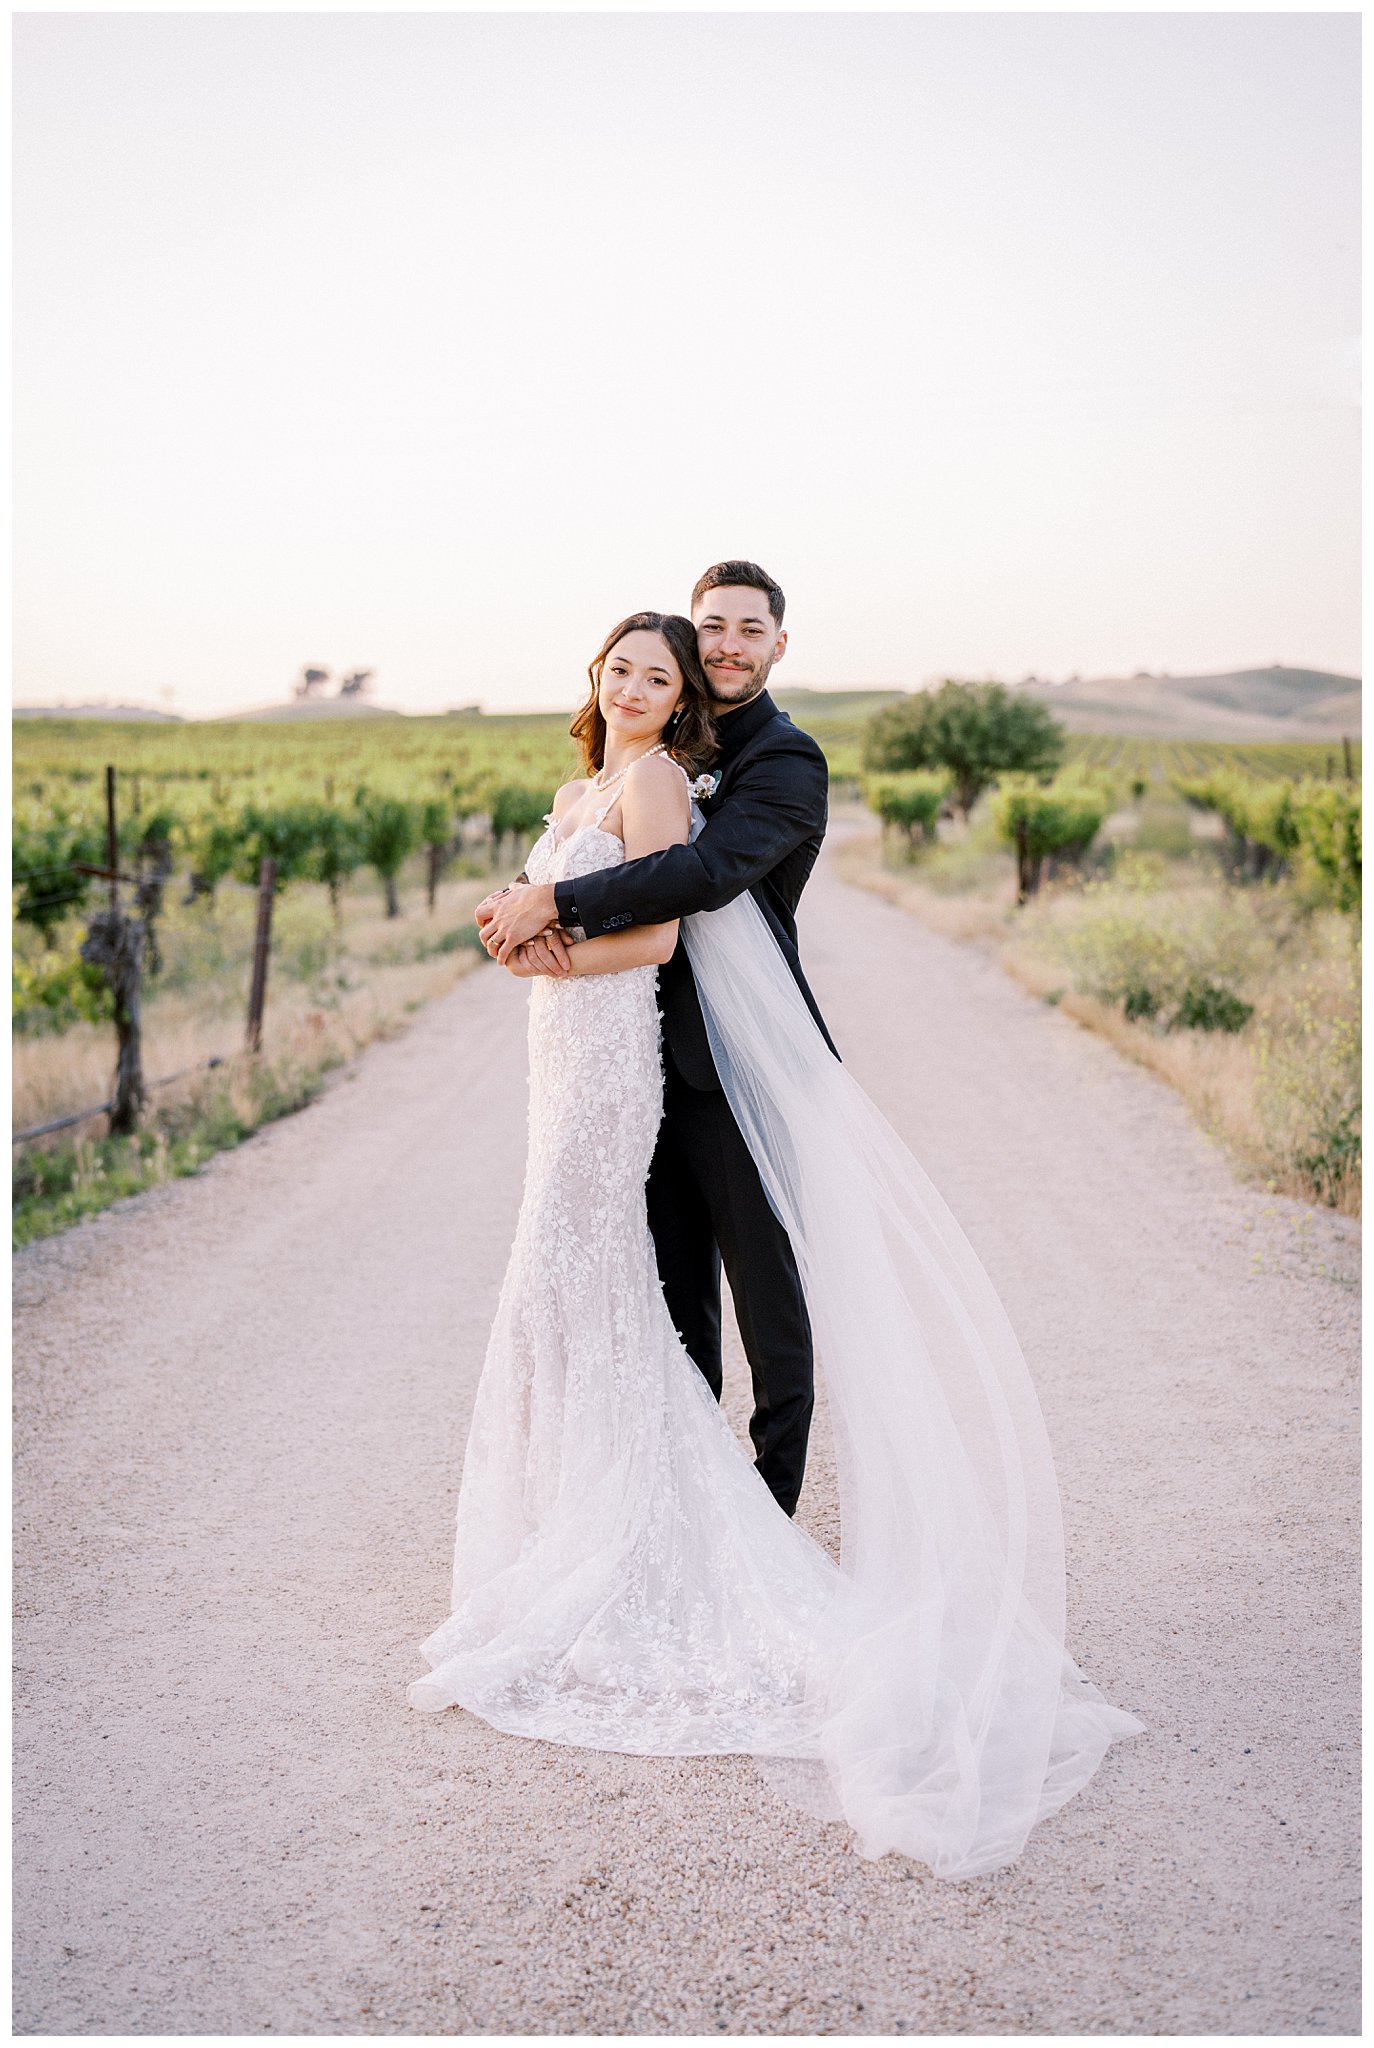 A bride and groom in the vineyards at Bella Terra on their springtime wedding day.